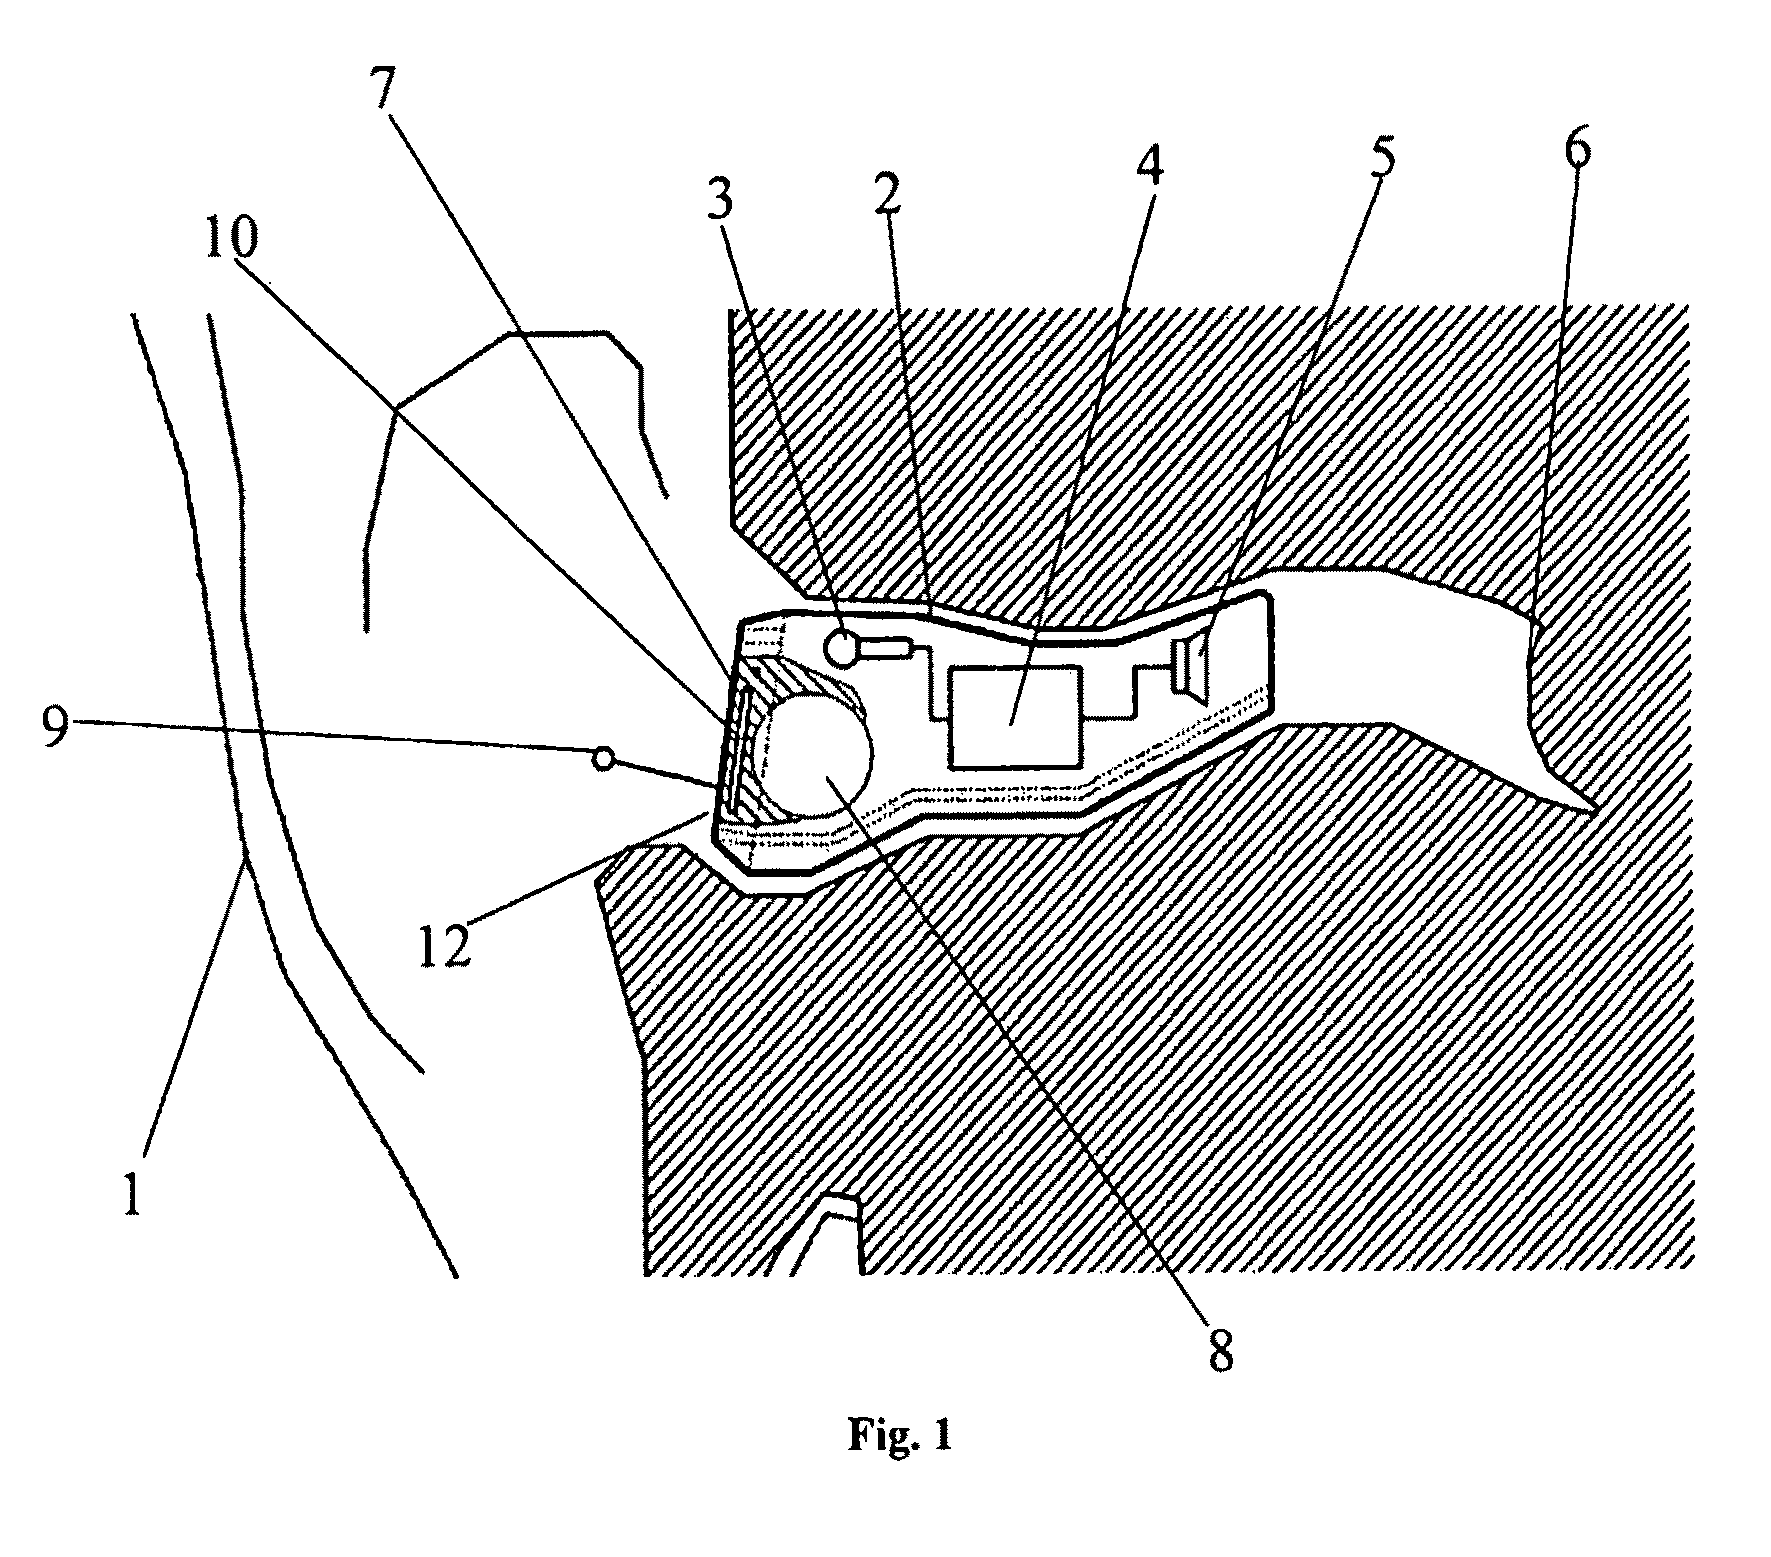 Hearing aid with antenna for reception and transmission of electromagnetic signals